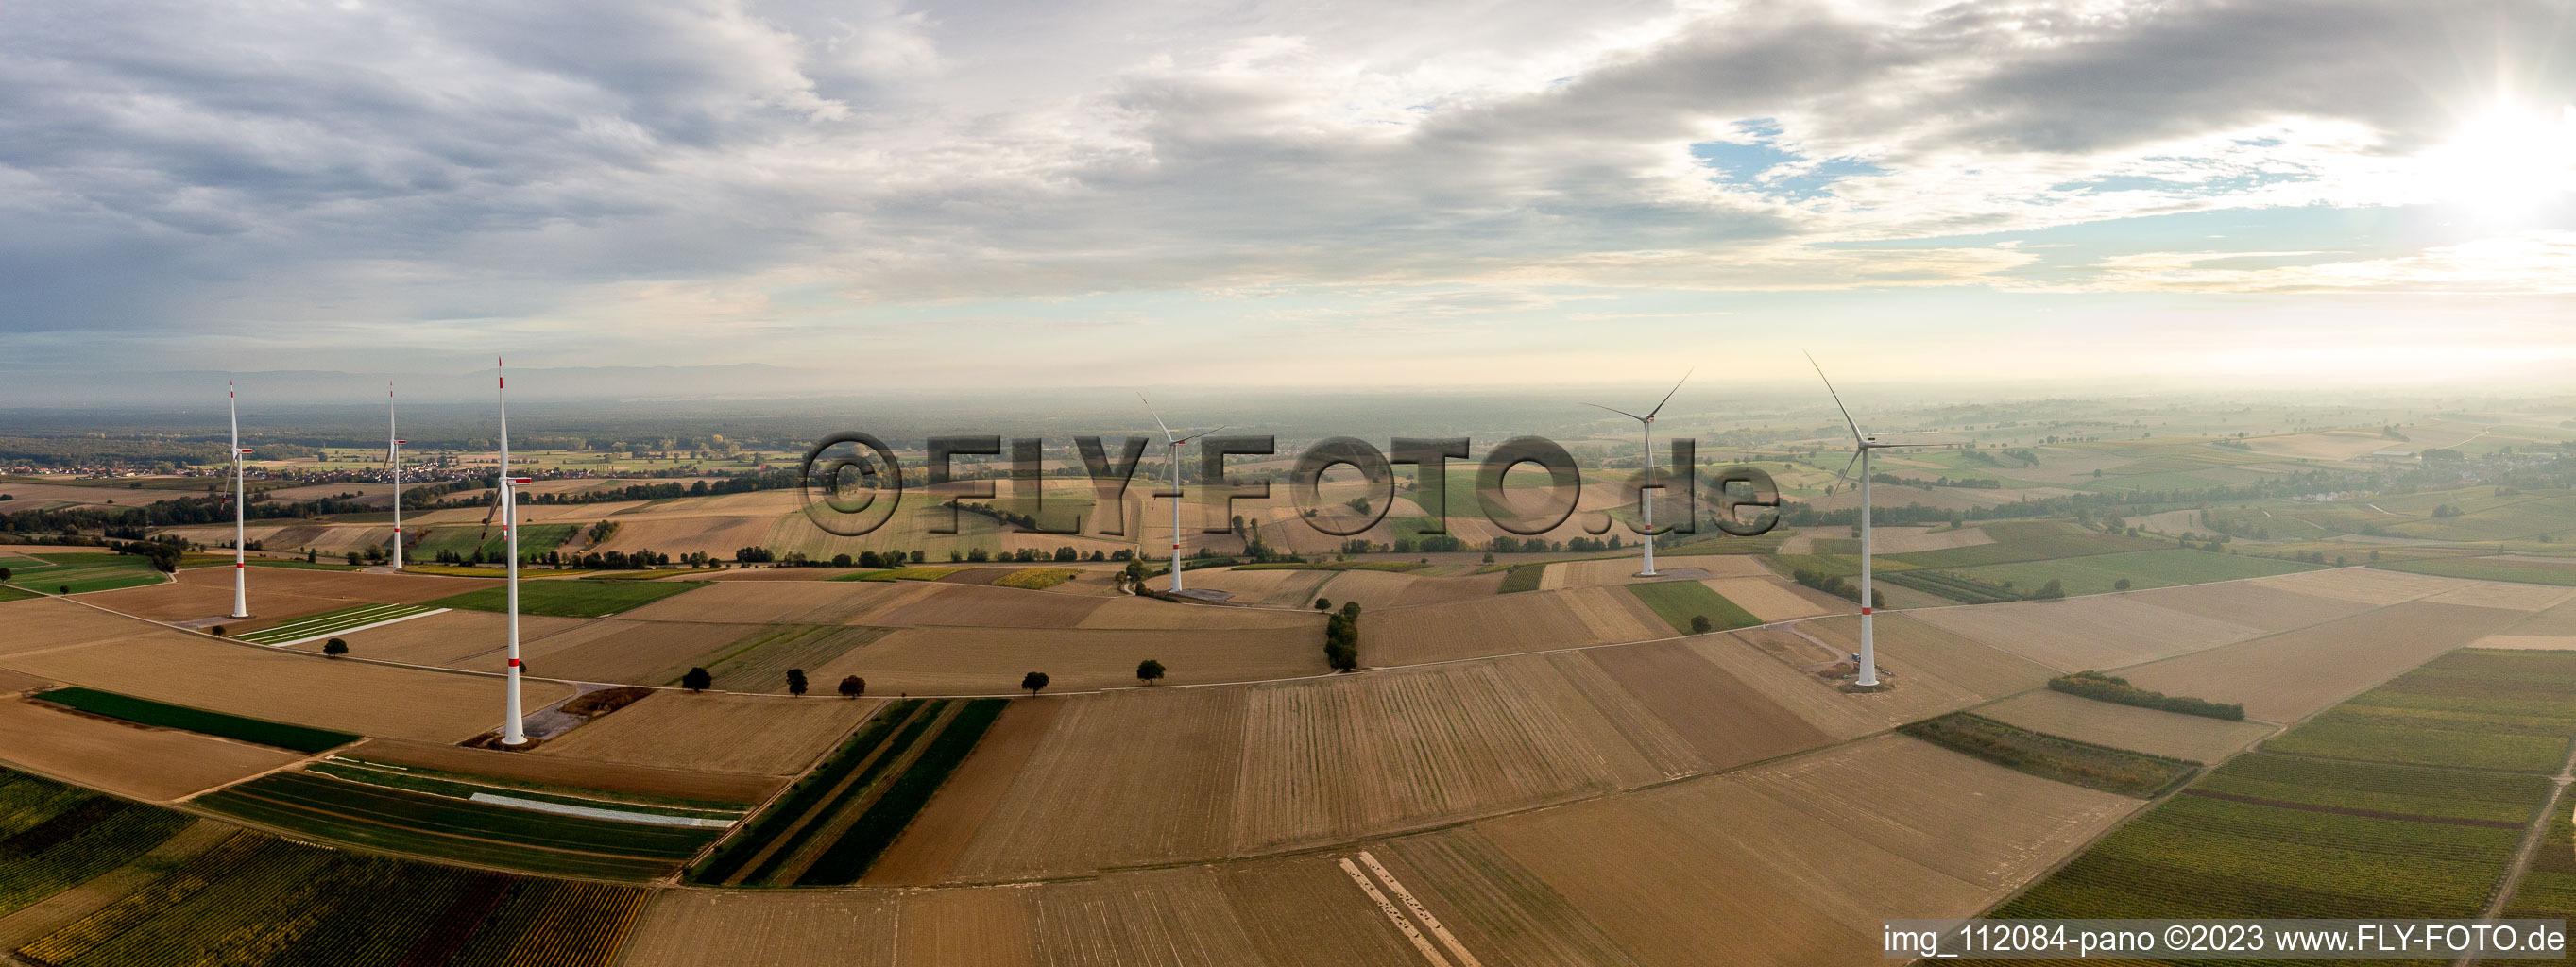 Aerial view of EnBW wind farm - wind turbine with 6 wind turbines in Freckenfeld in the state Rhineland-Palatinate, Germany